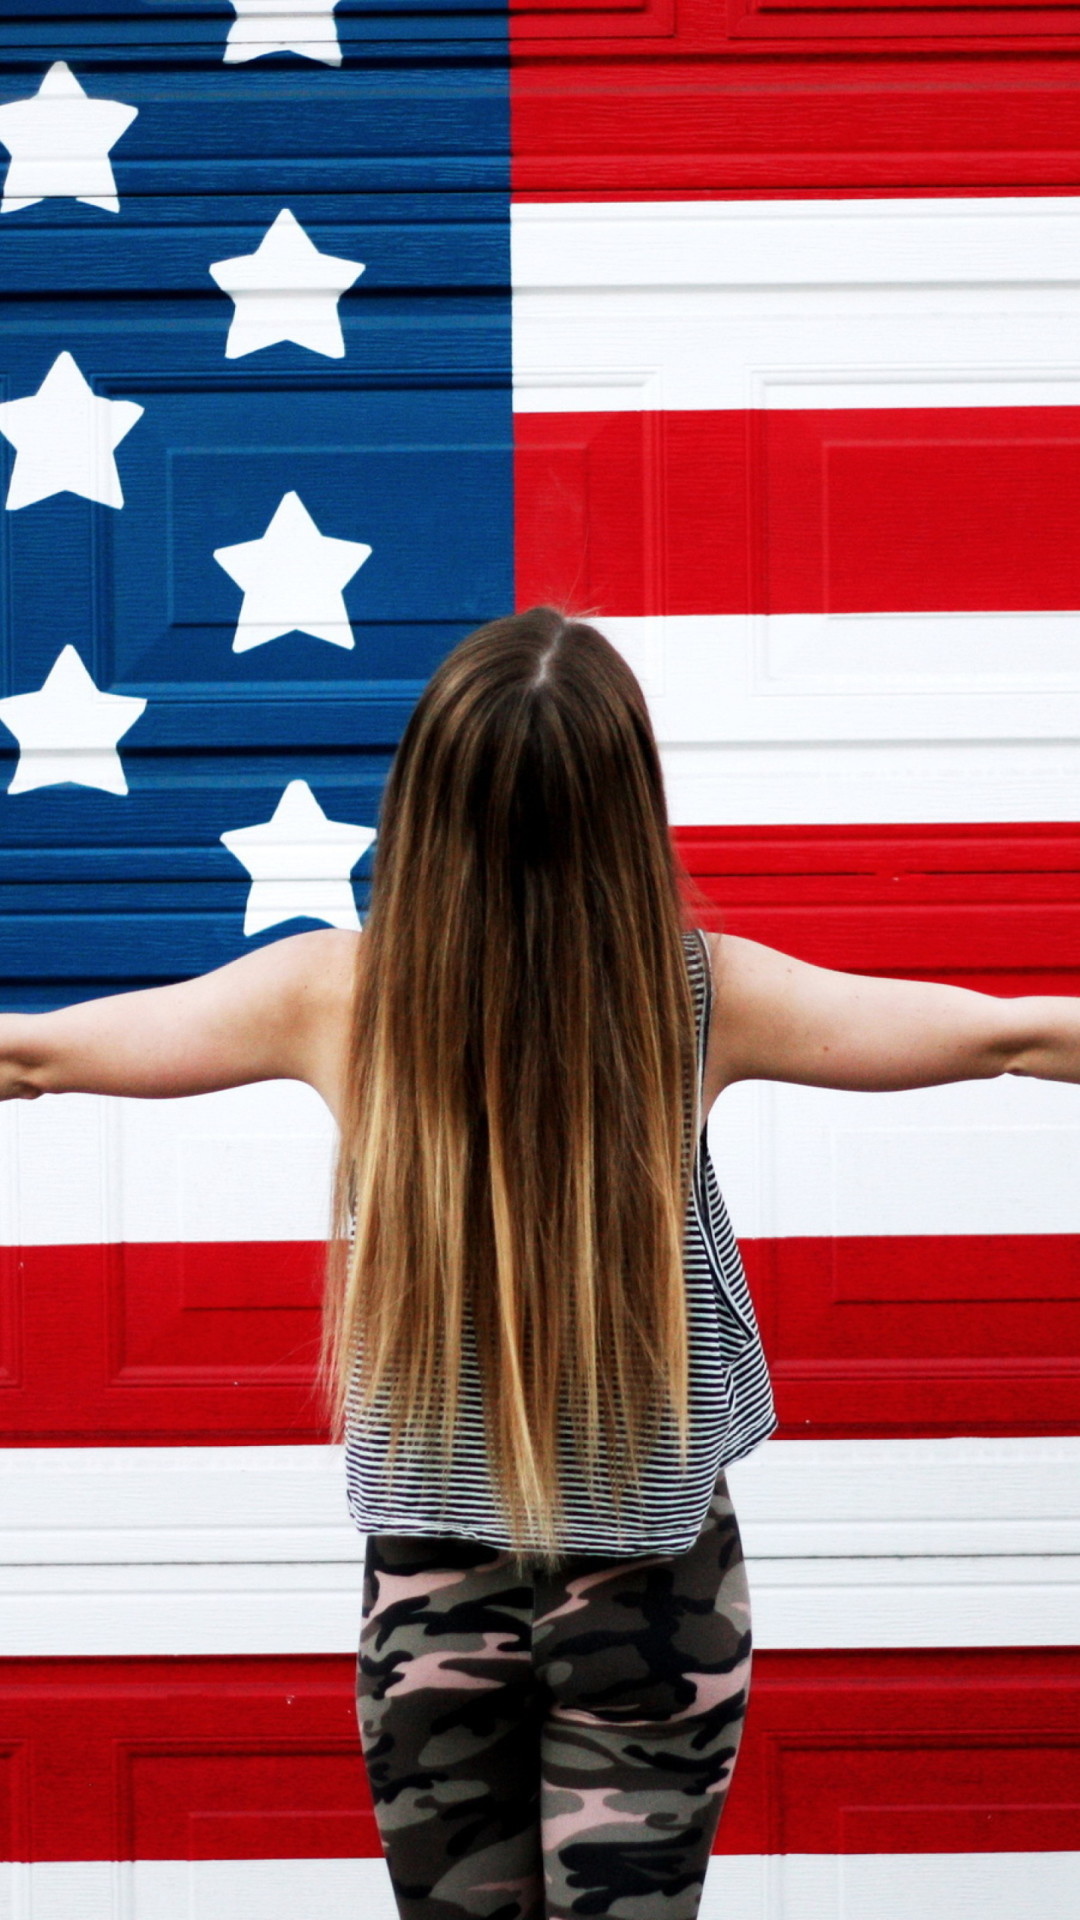 1080x1920 American girl in front of usa flags. america wallpaper ...